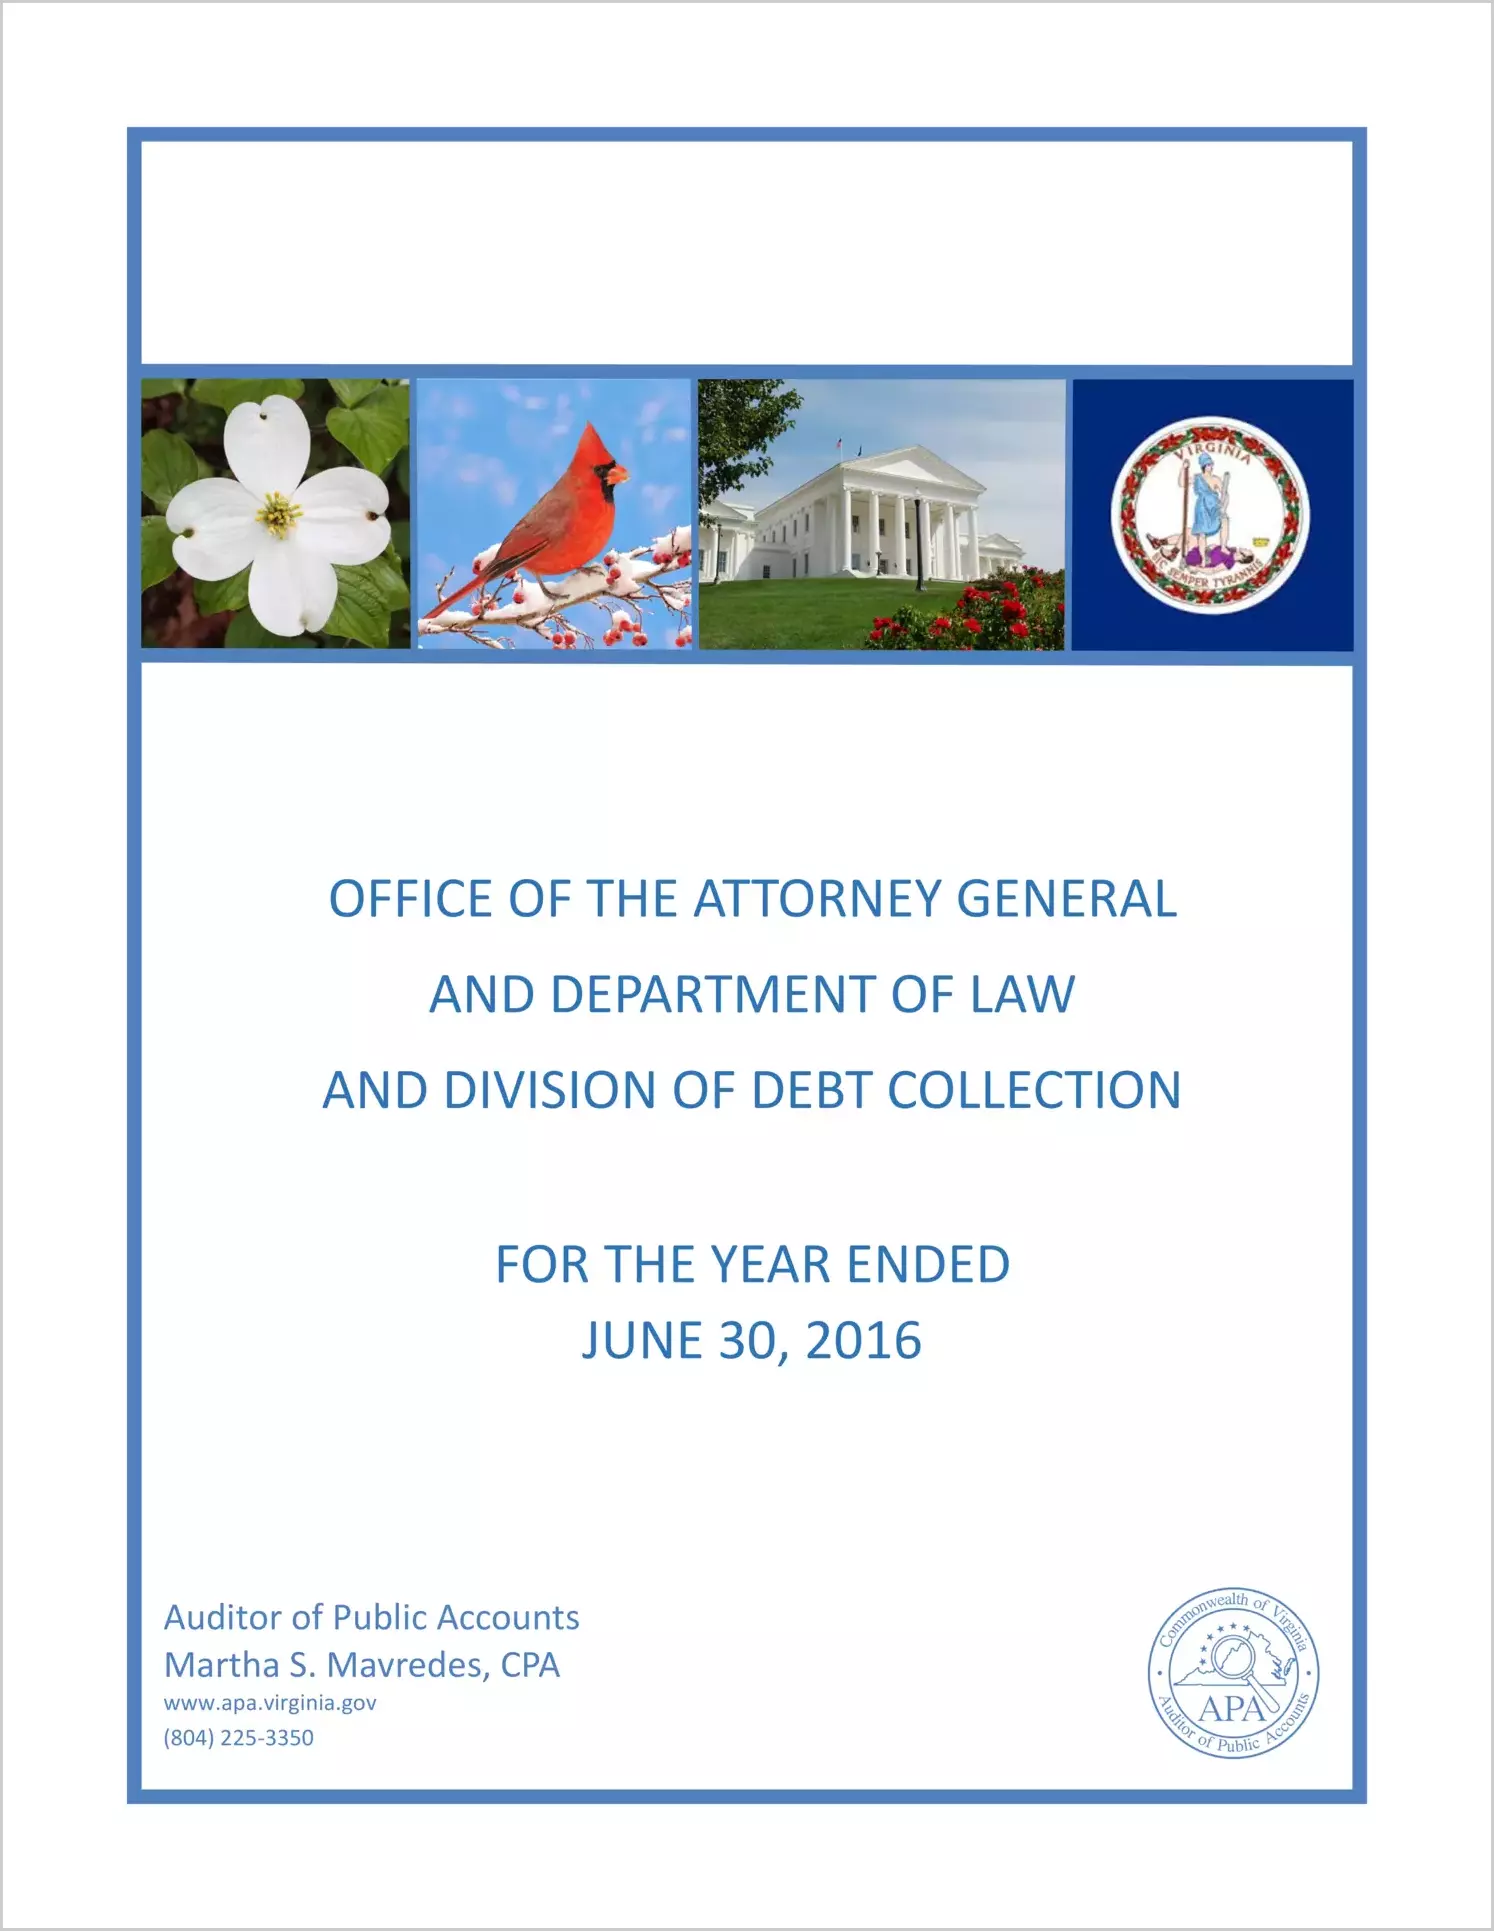 Office of the Attorney General and Department of Law and Division of Debt Collection for the year ended June 30, 2016